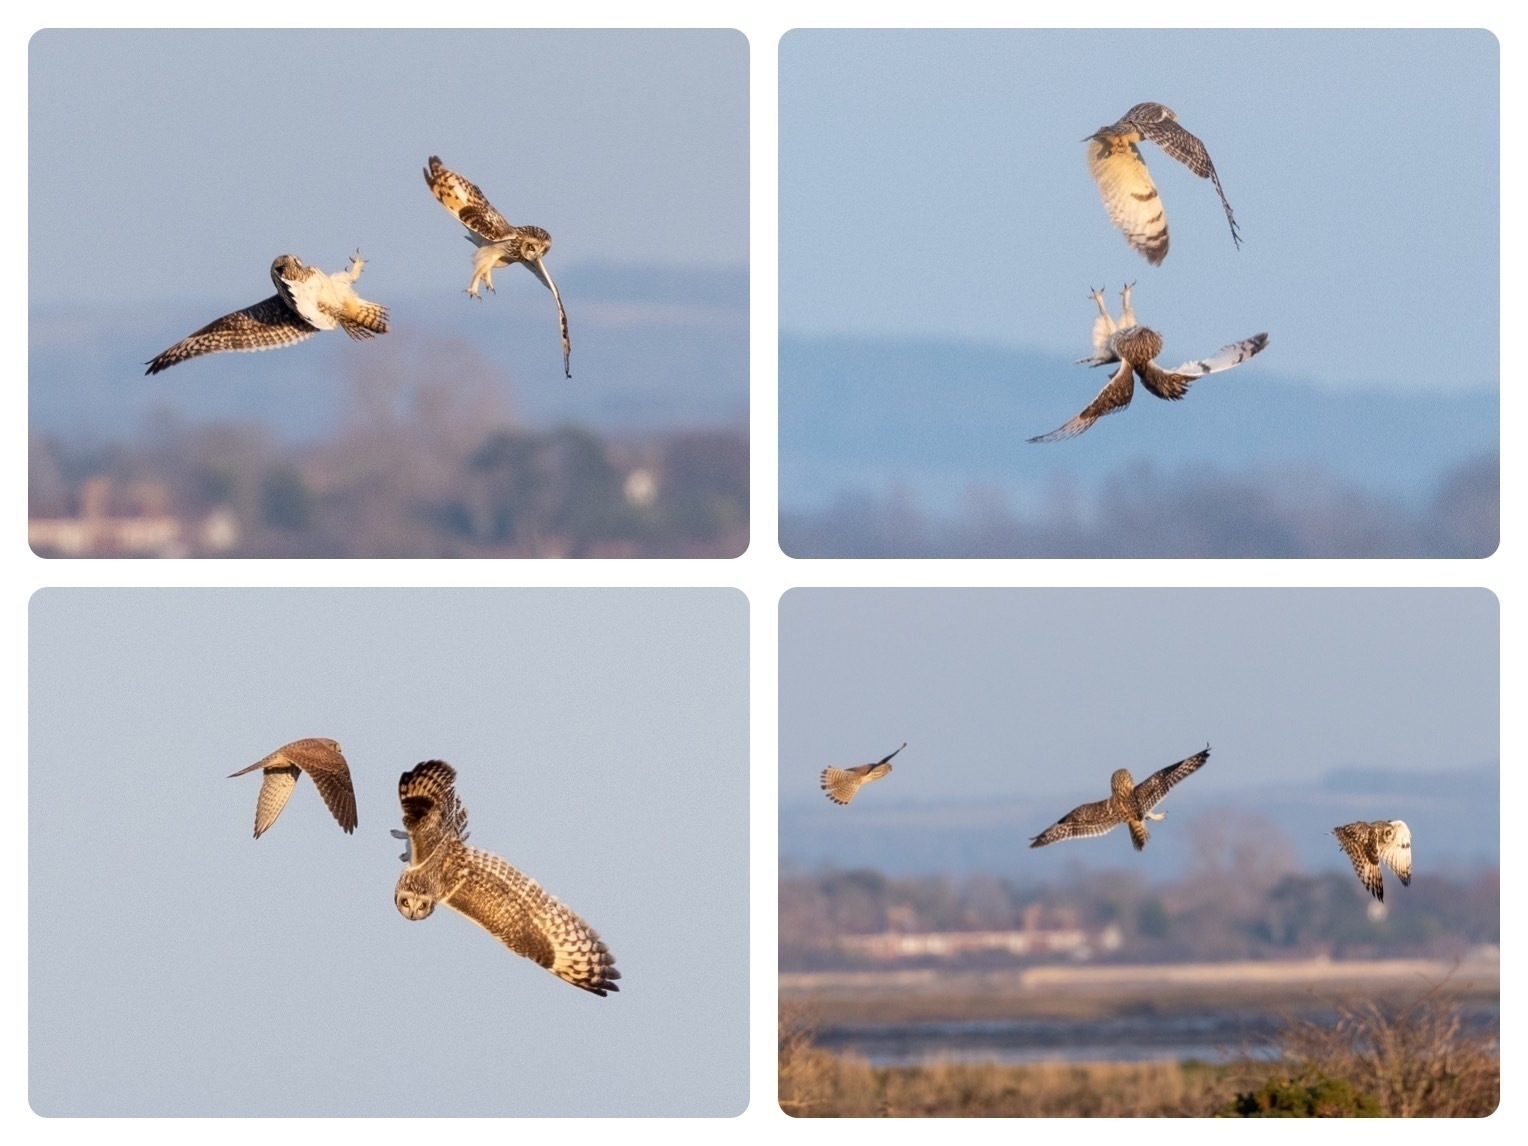 Collage of photos showing various pictures of short-eared owls